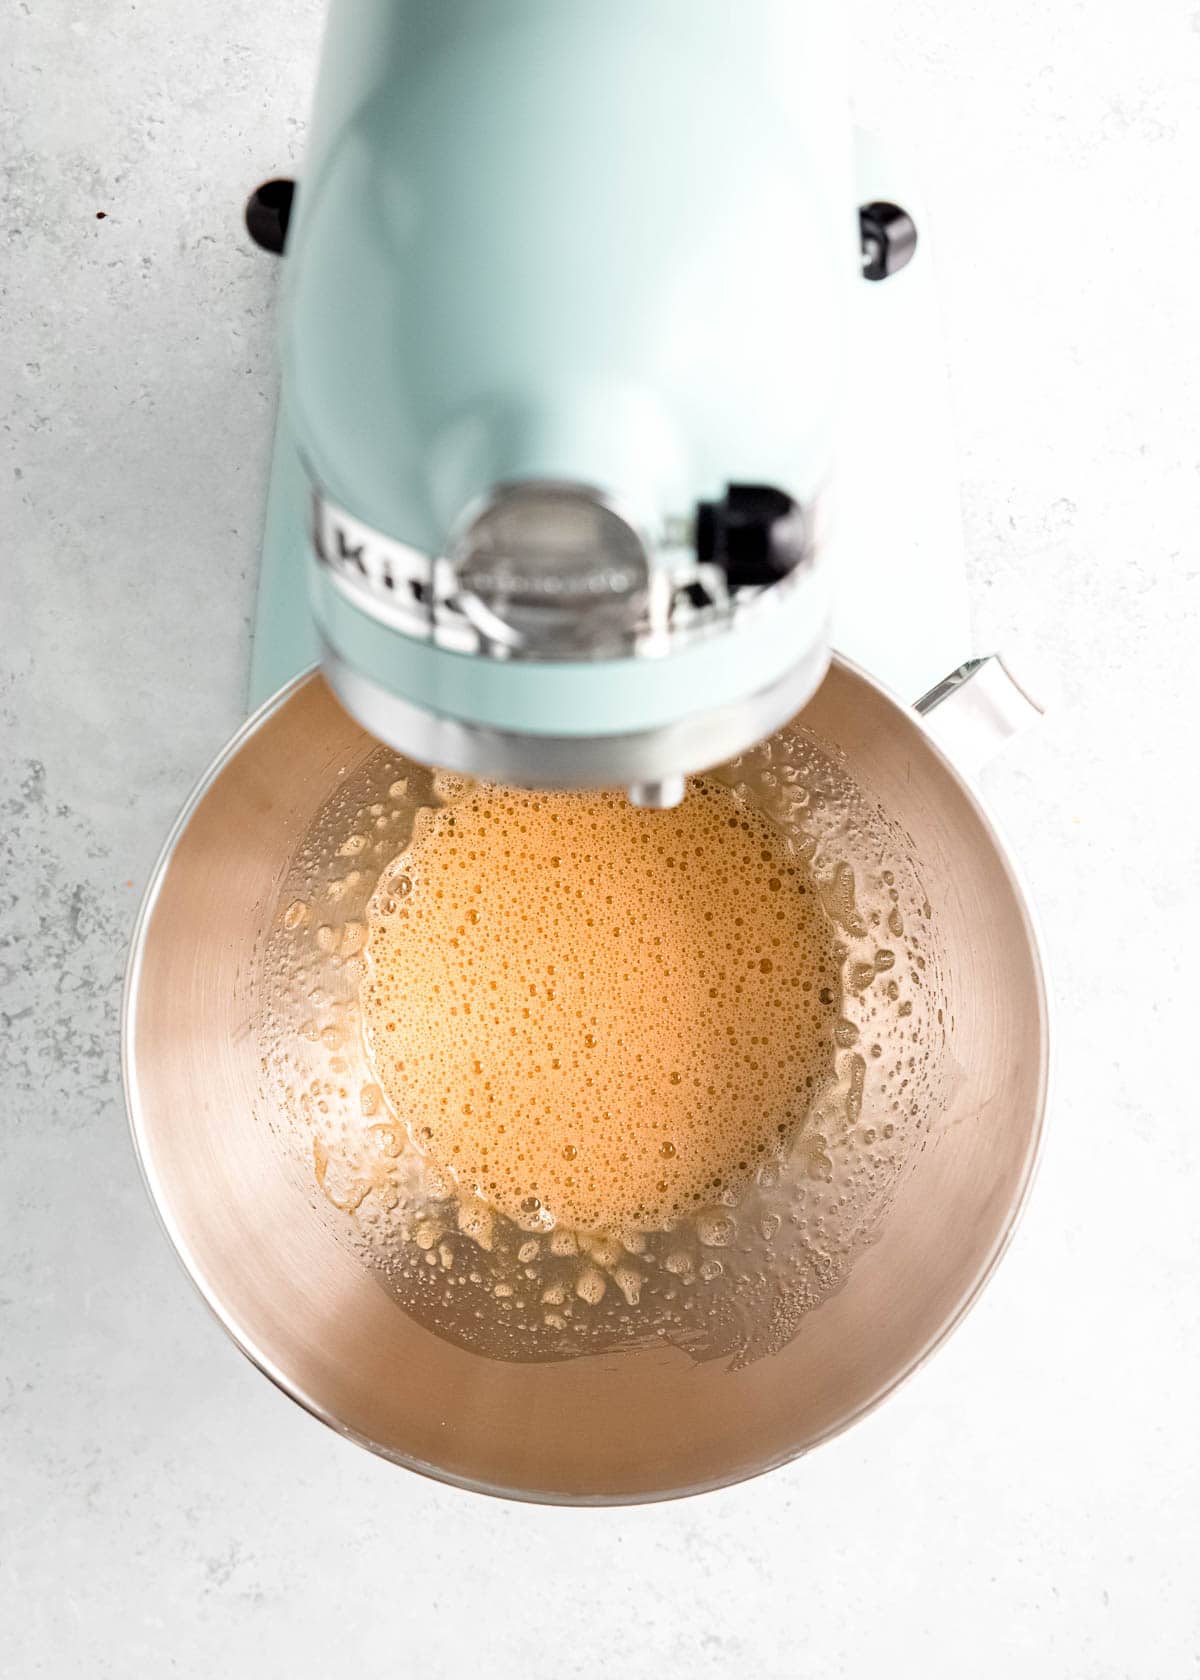 light, fluffy egg mixture in stand mixer bowl